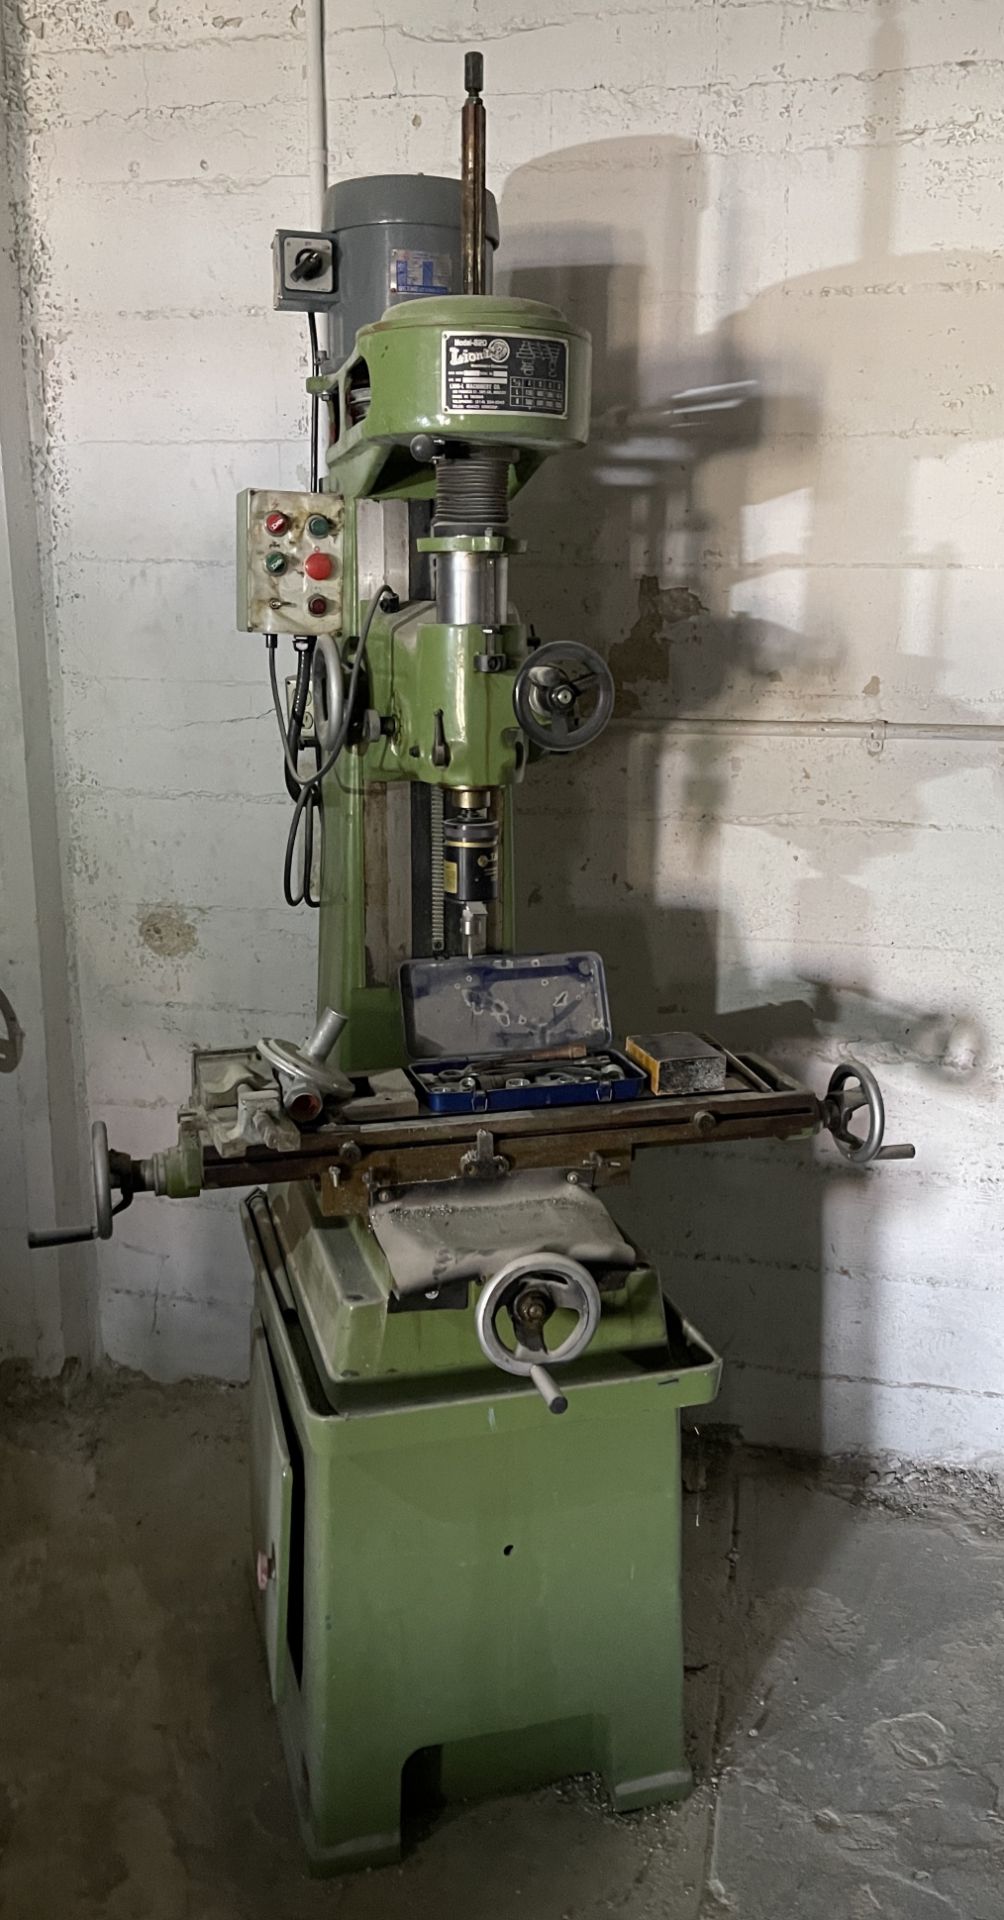 LION-L MODEL 820 COMMERCIAL MILL DRILL PRESS - Image 3 of 6